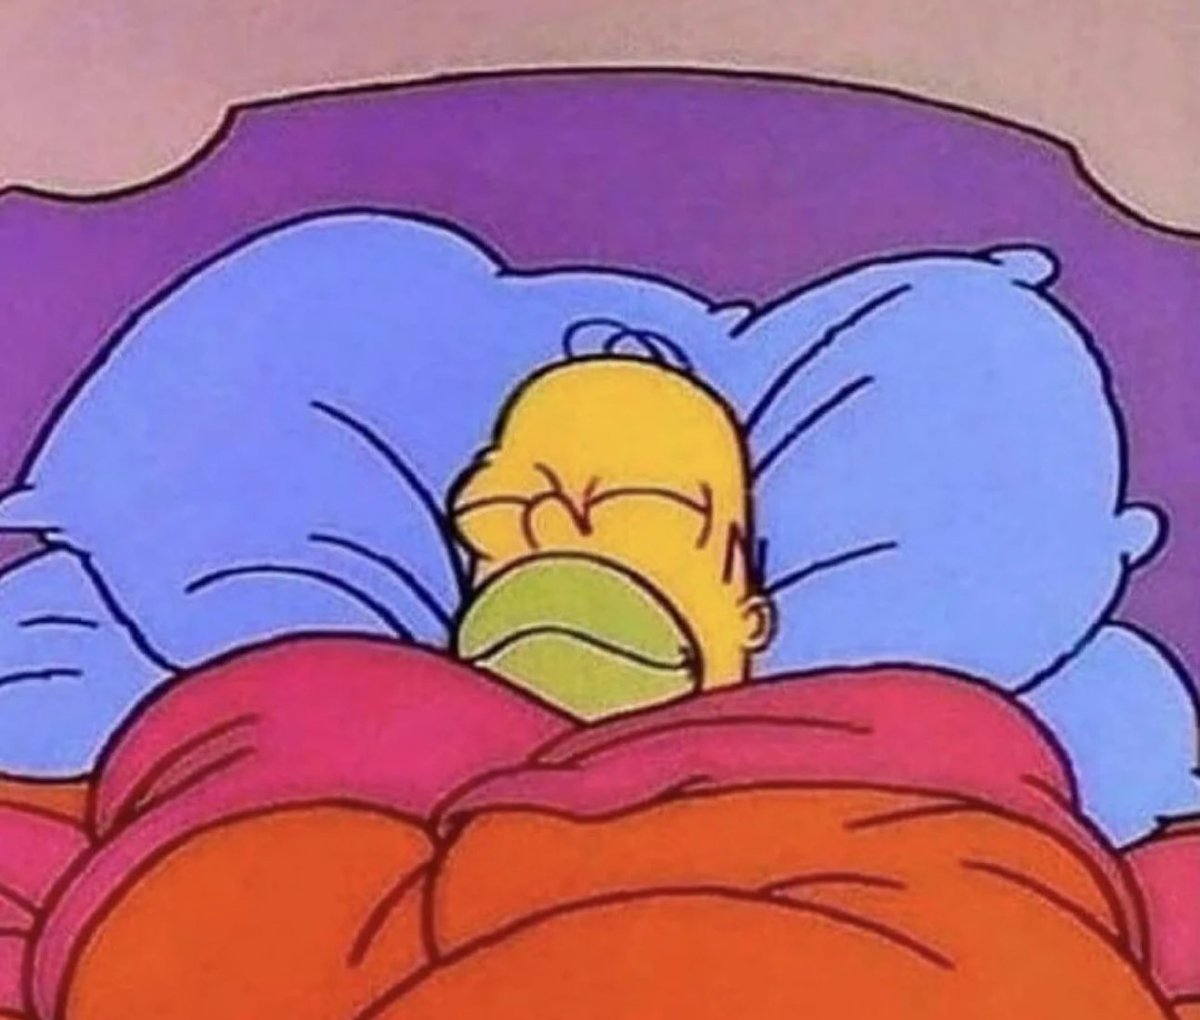 How I sleep knowing that an eclipse is a natural occurrence and not a sign of Armageddon